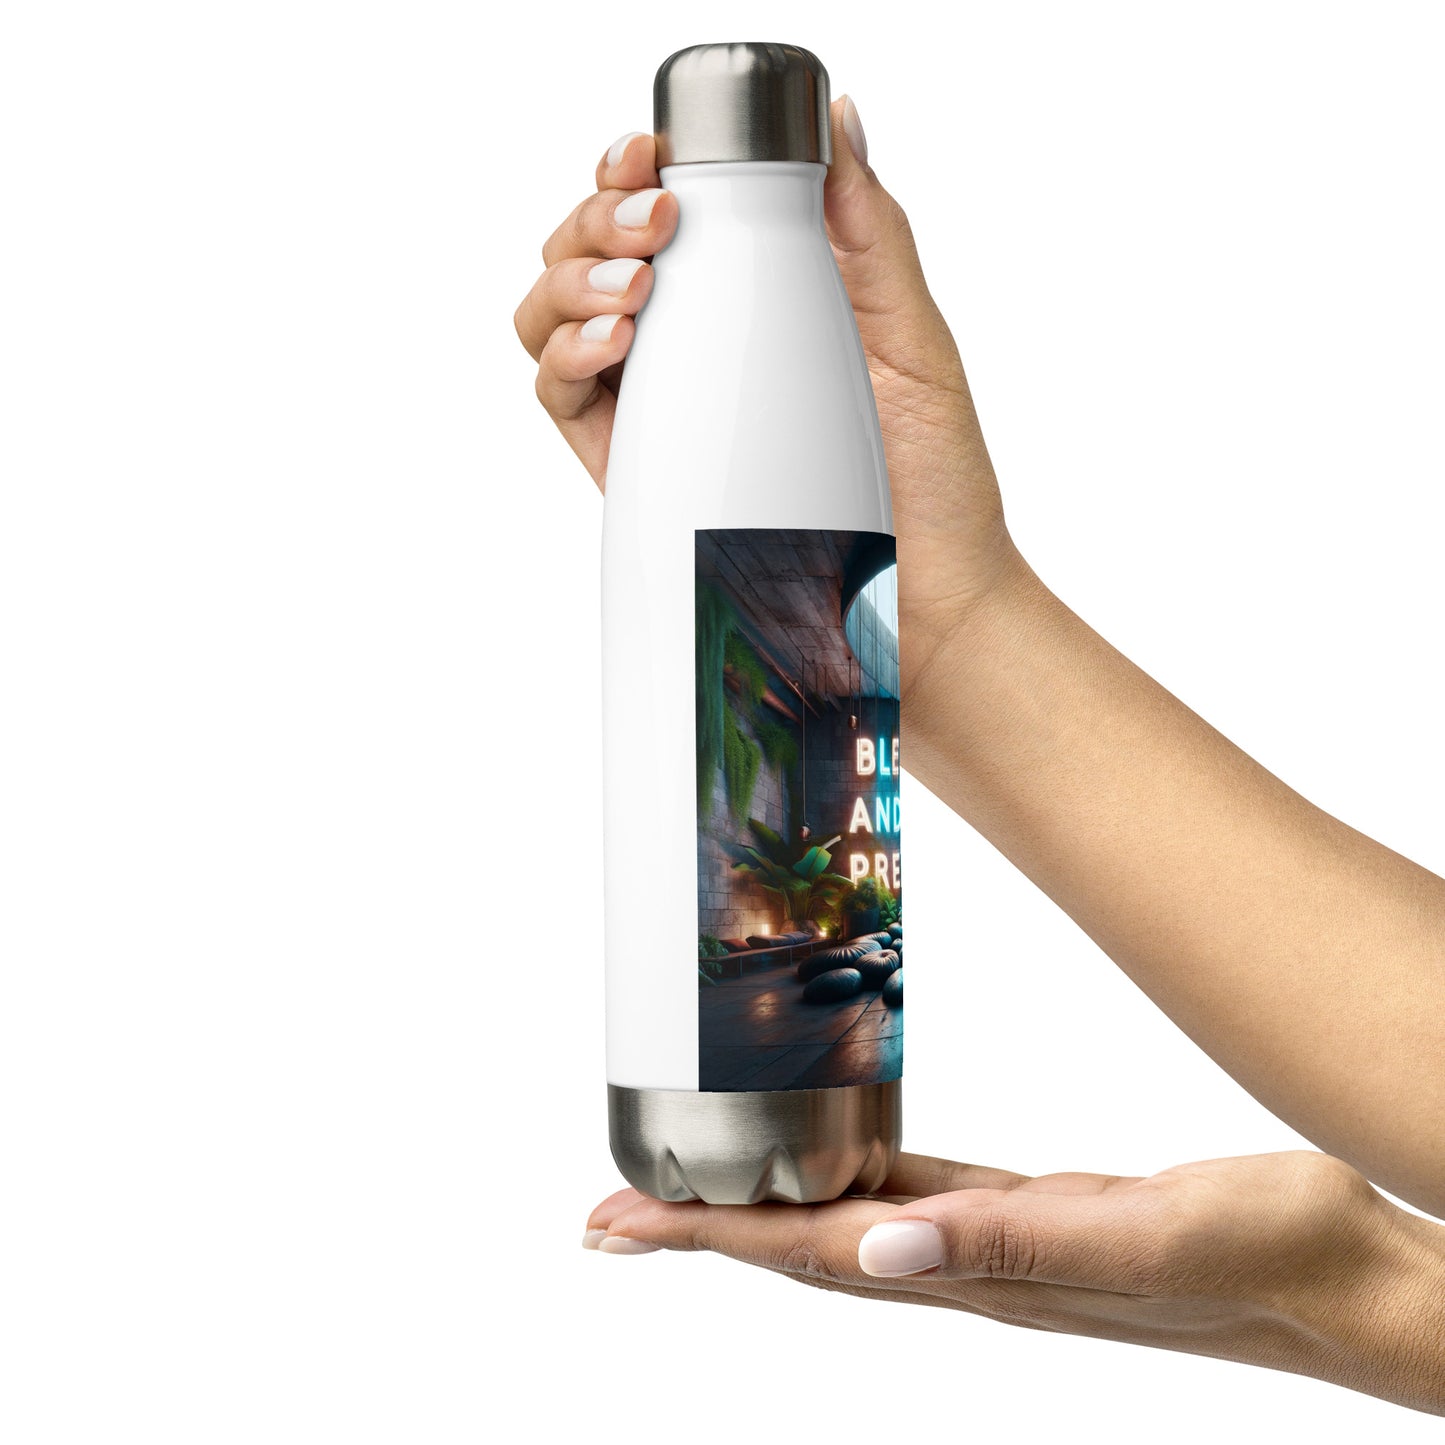 Blessed And Not Pressed Stainless steel water bottle